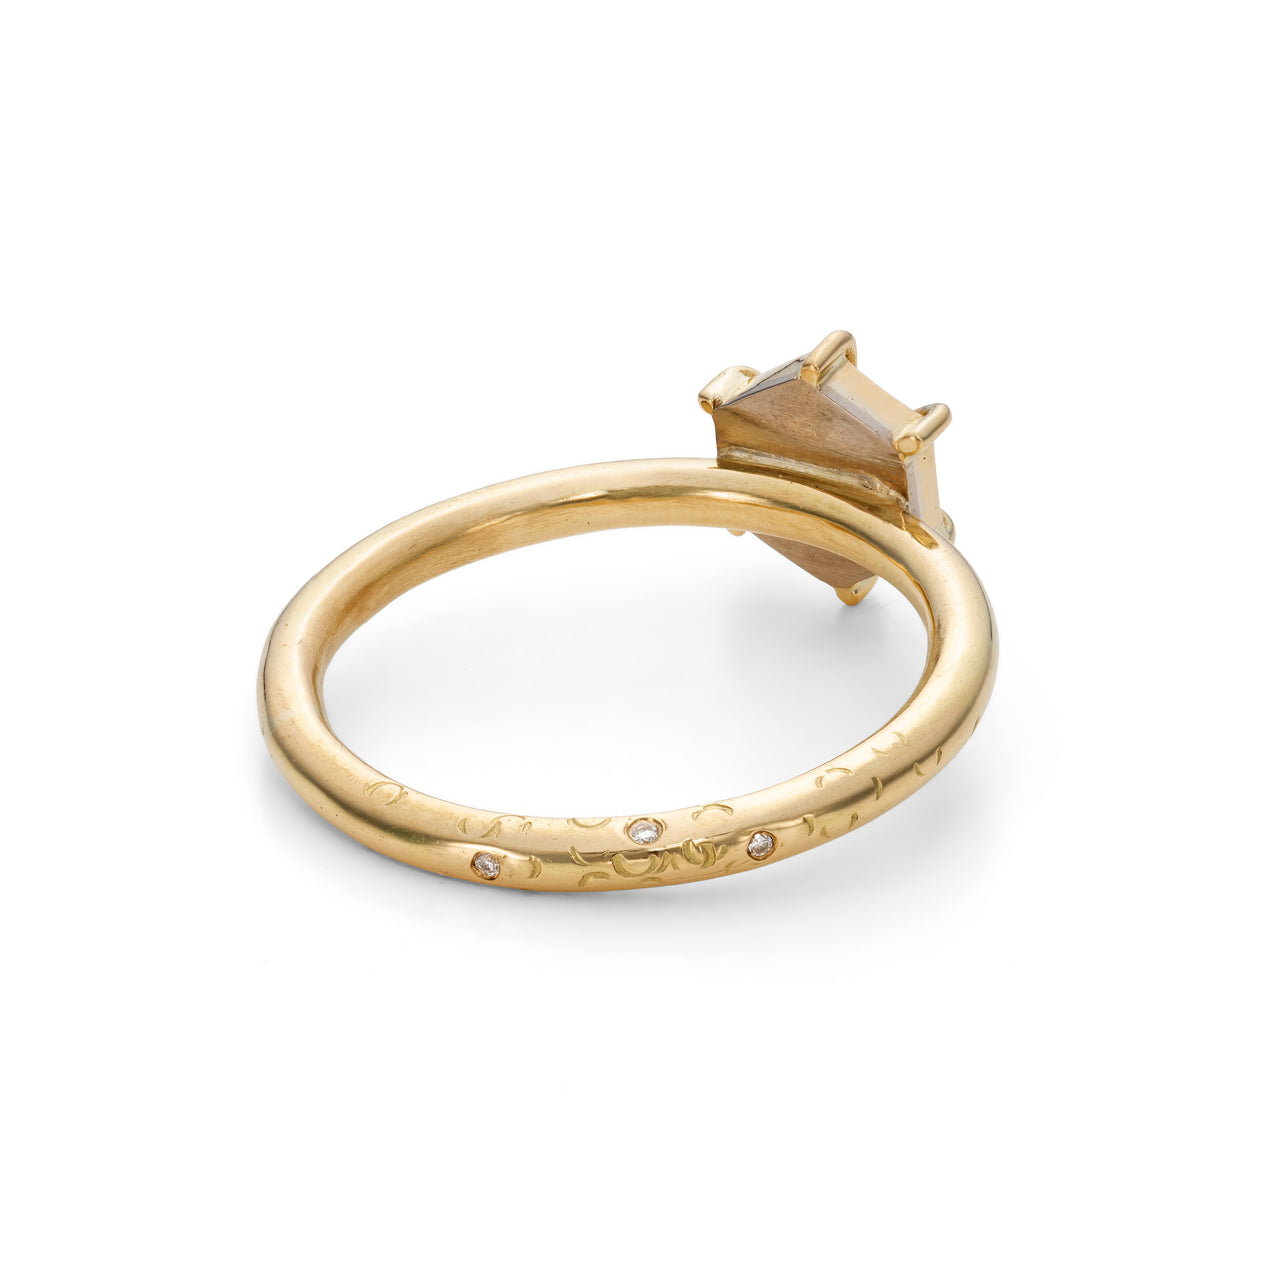 'Dartmoor' Collection Rose cut Misfit diamond solitaire ring in 18ct yellow and white recycled gold Handmade jewellery by Corrinne Eira Evans